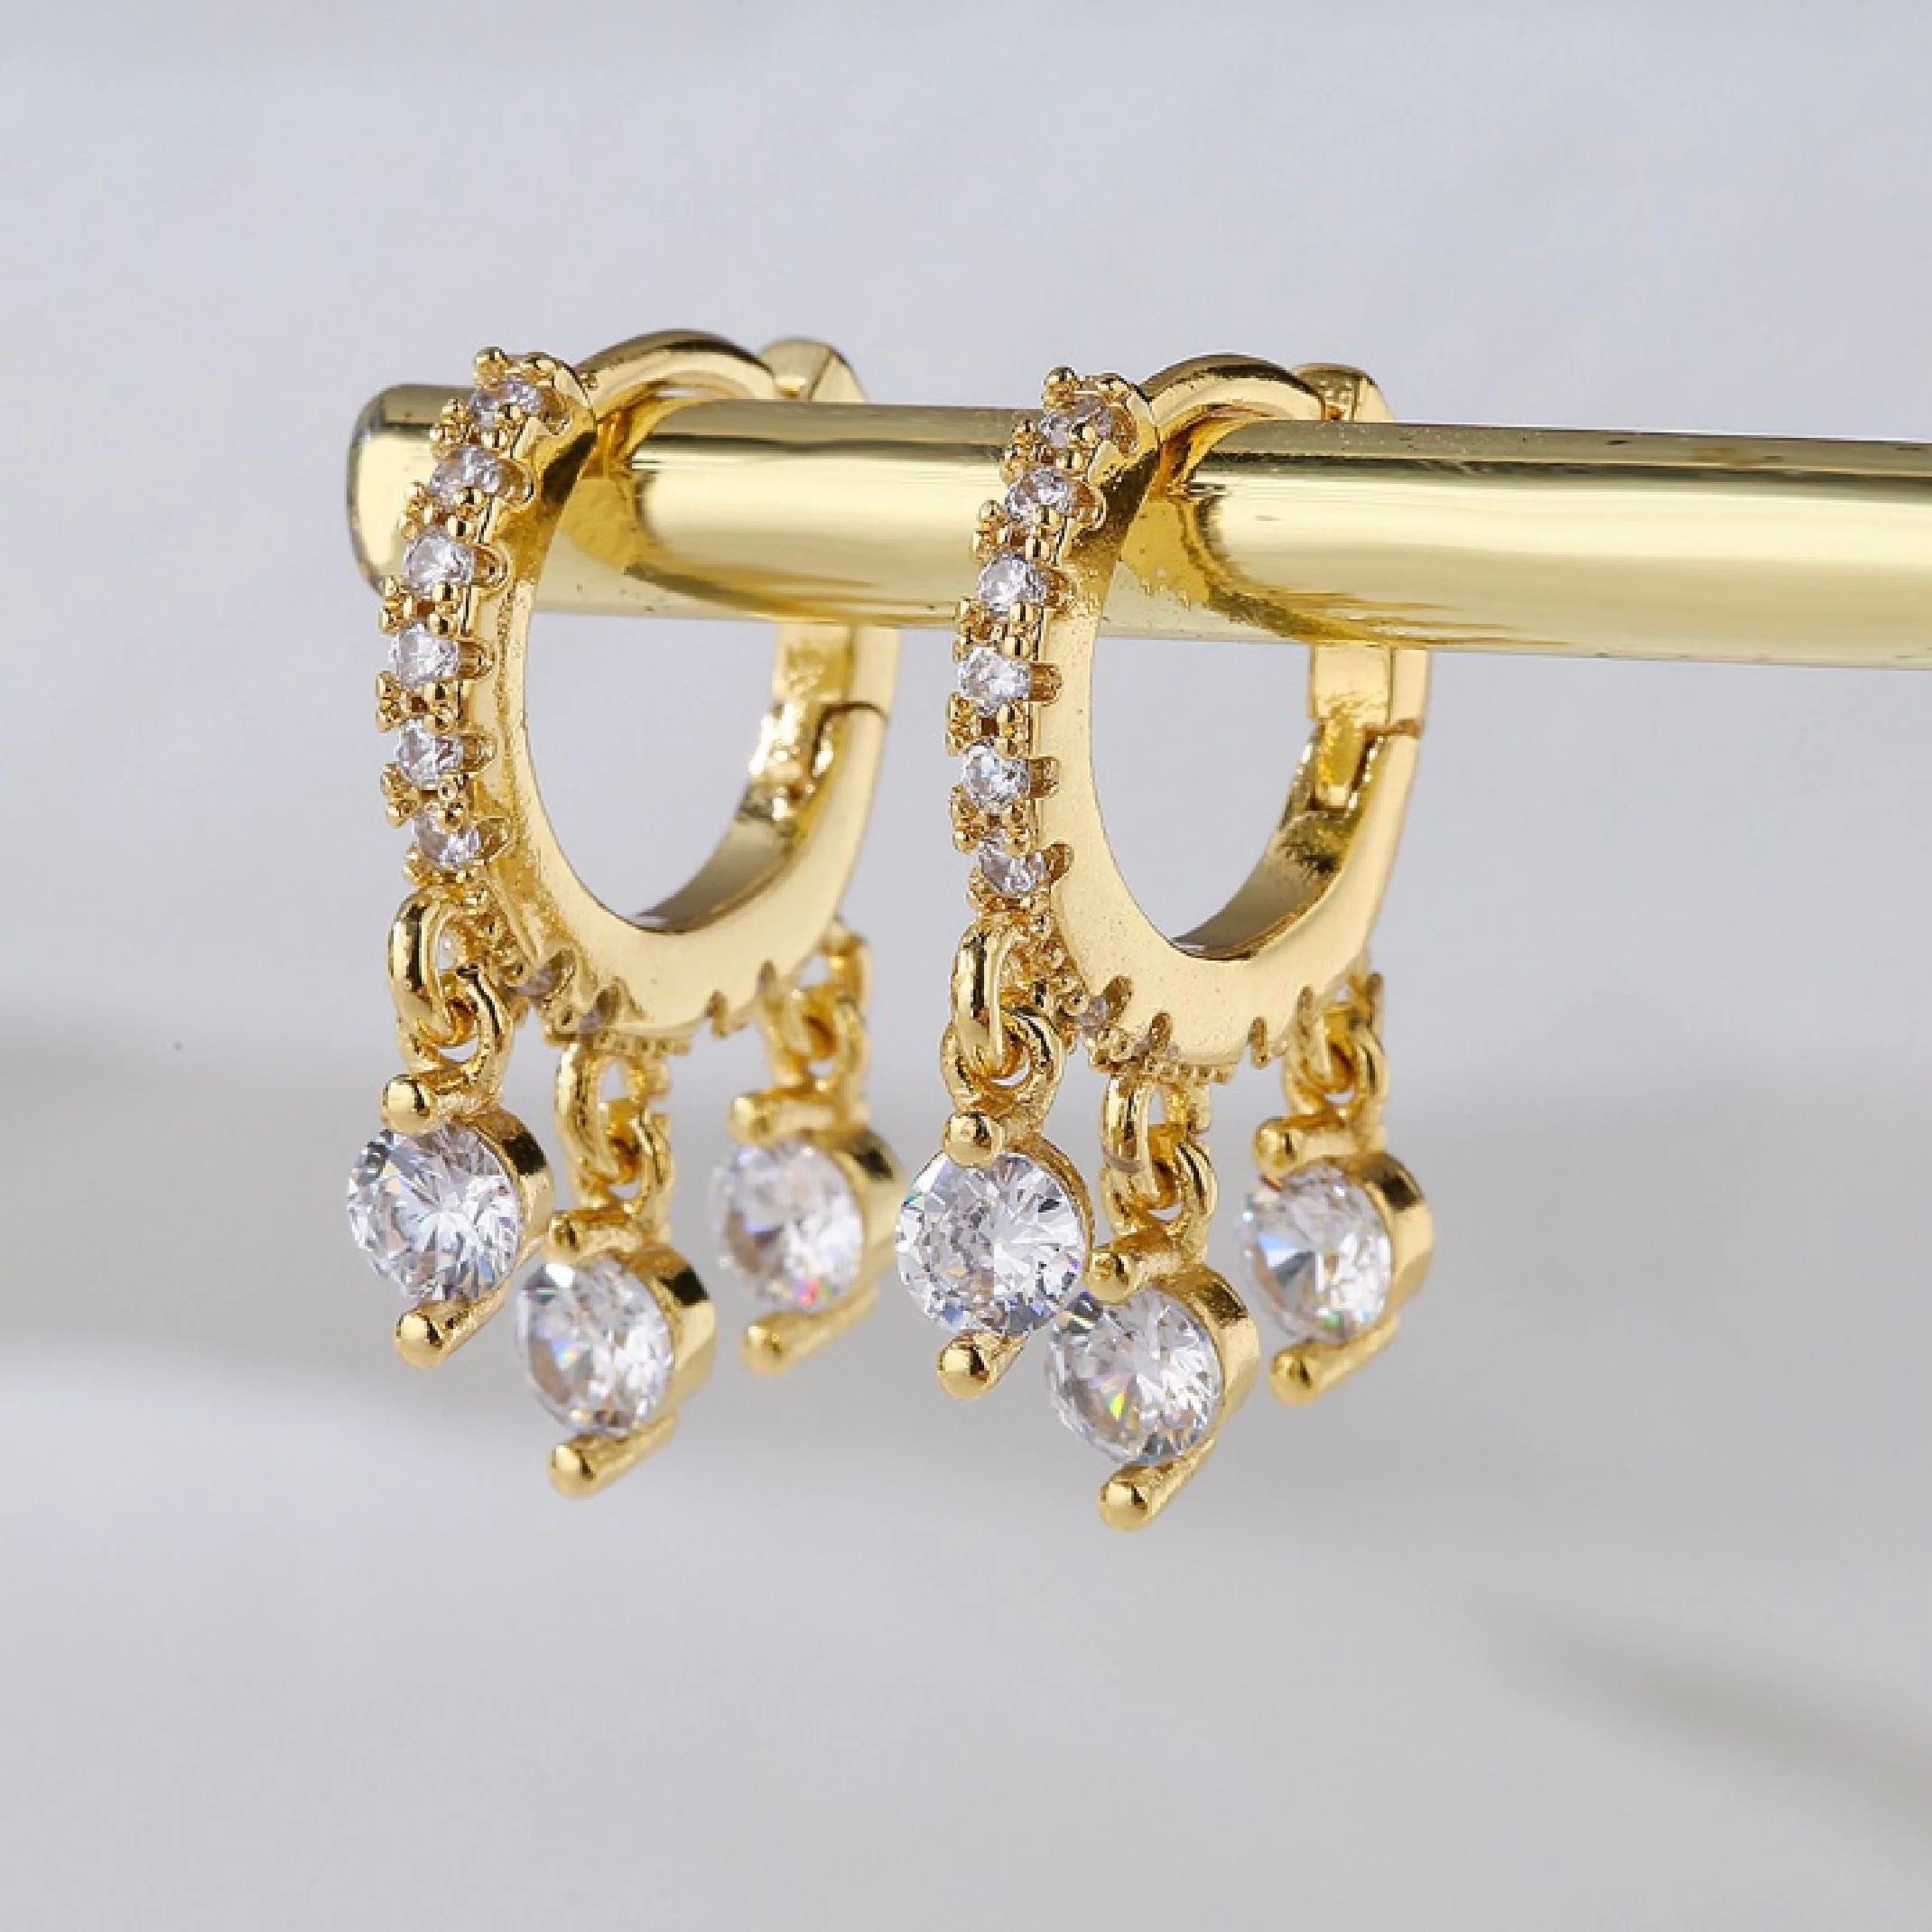 Gorge Malorge Earring Collection 